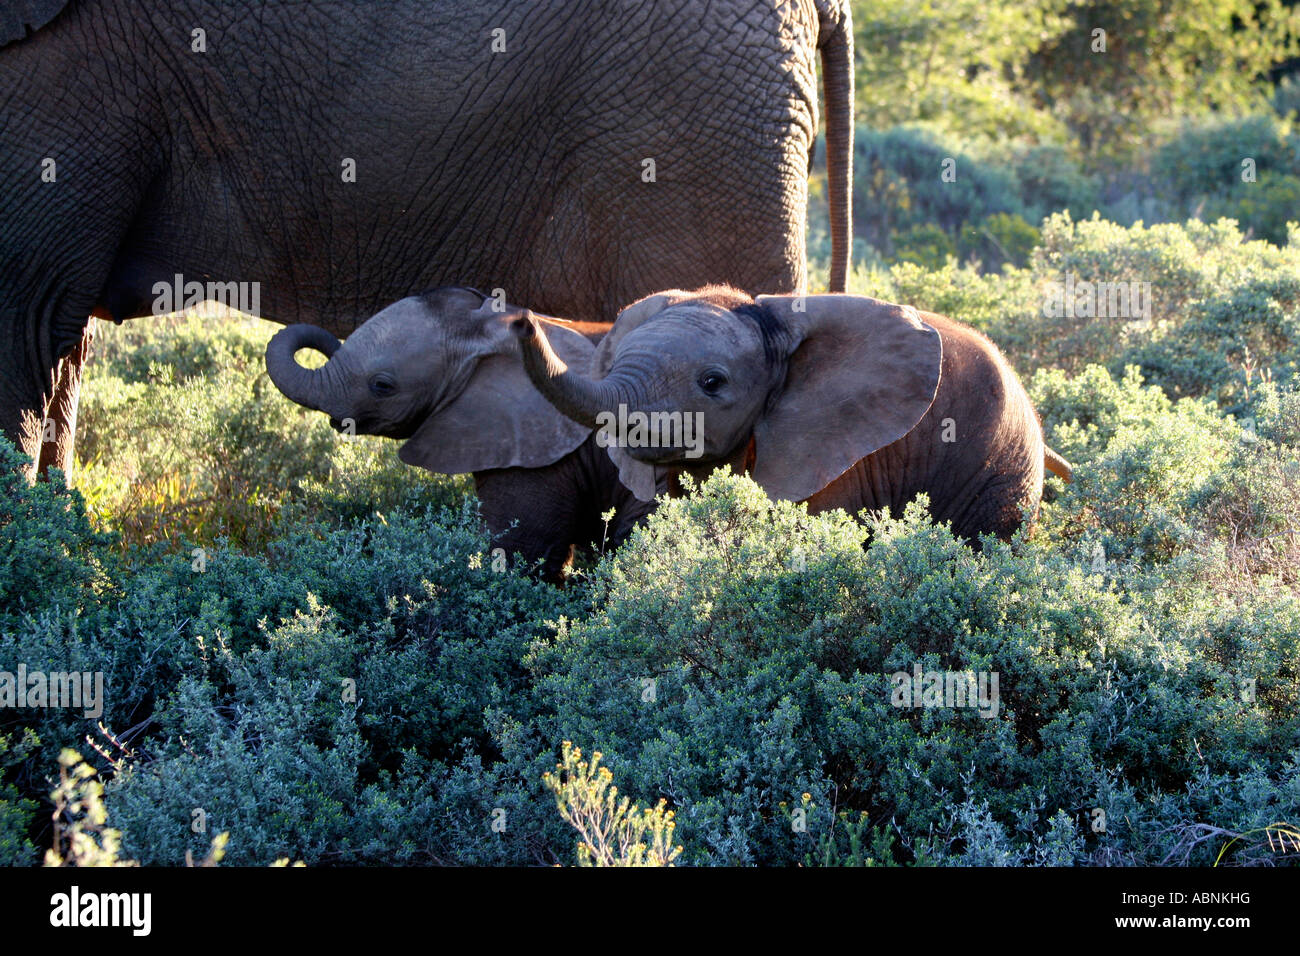 African Elephant, Loxodonta africana, calves trumpting and trunk curling, Cape, S. Africa Stock Photo